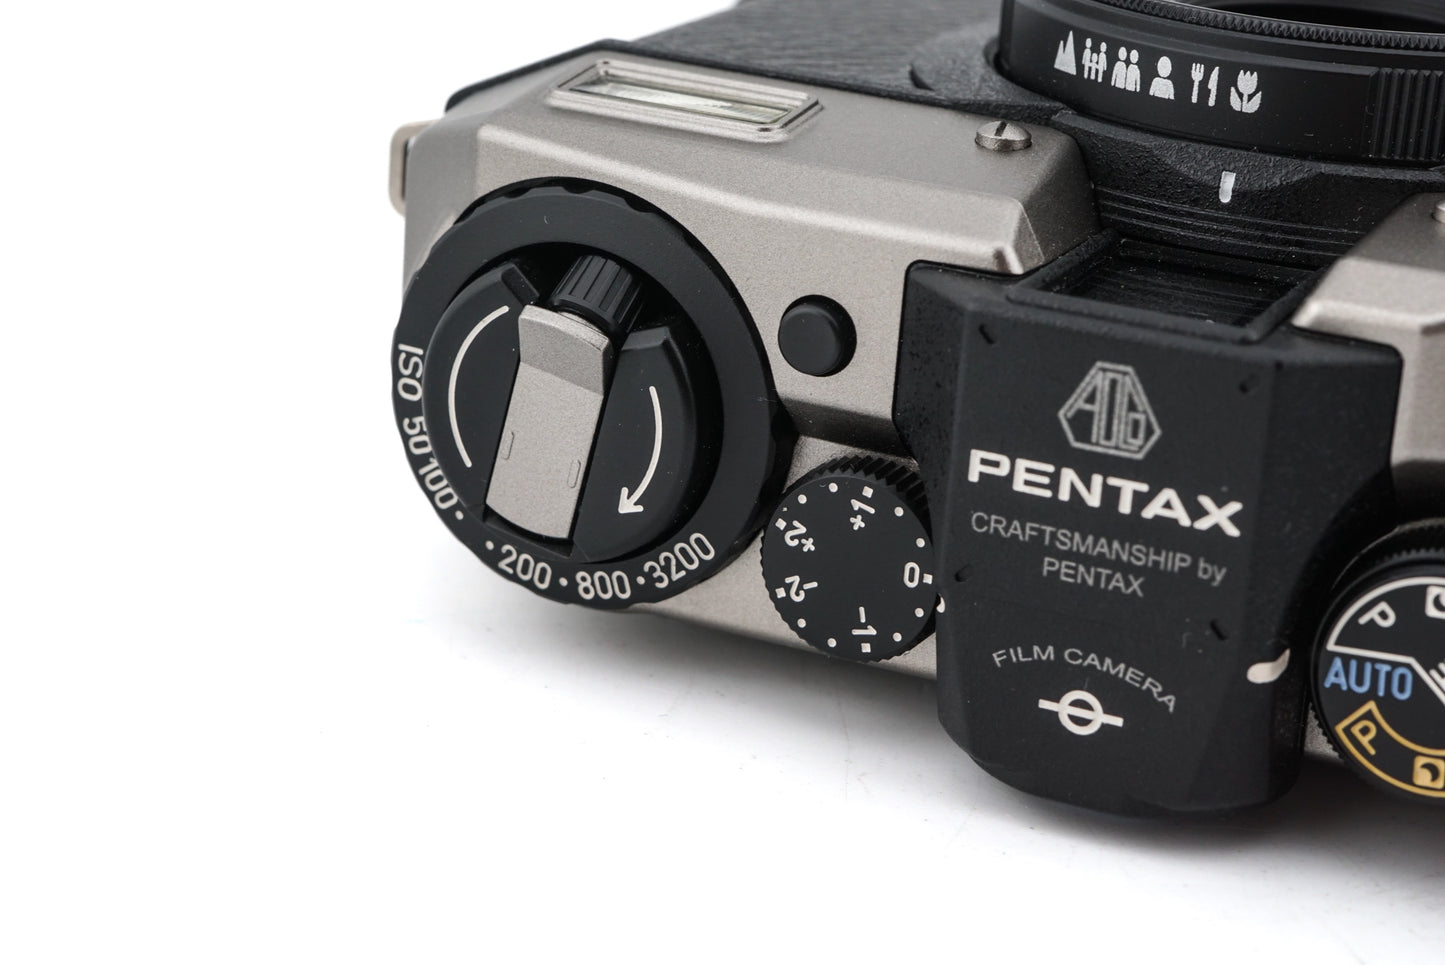 Pentax 17 film camera ISO dial, exposure compensation, and viewfinder